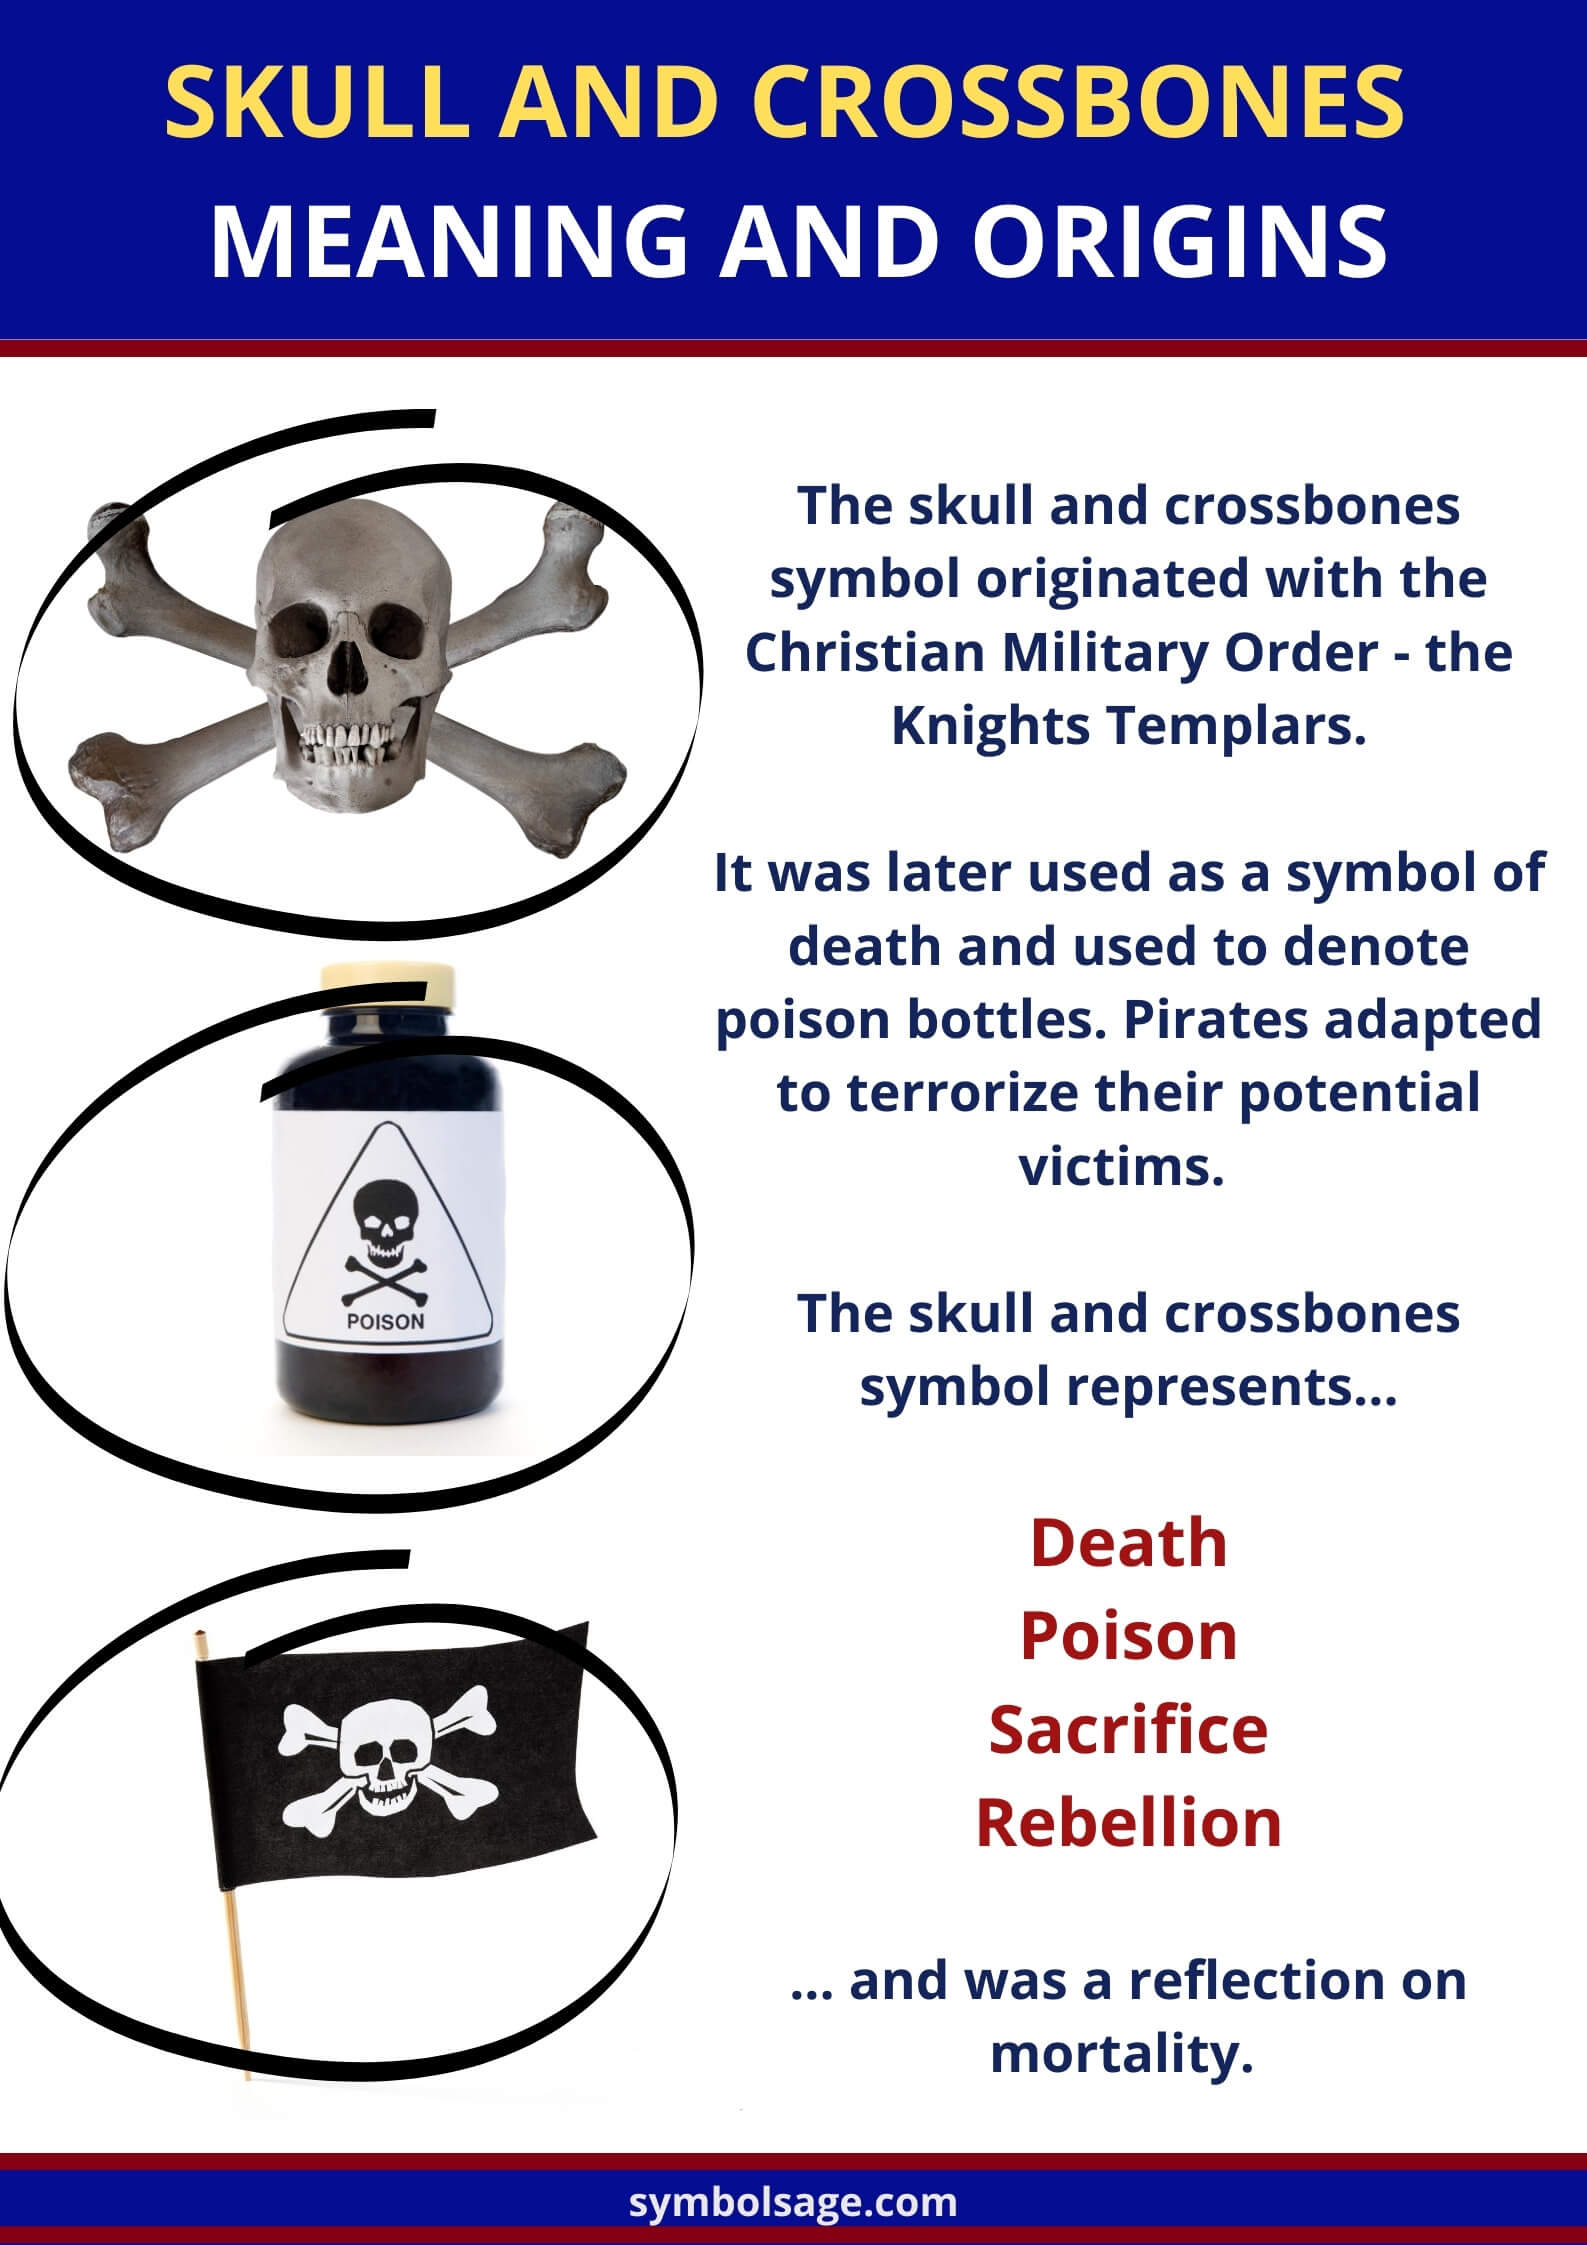 What is the skull and cross bones symbol